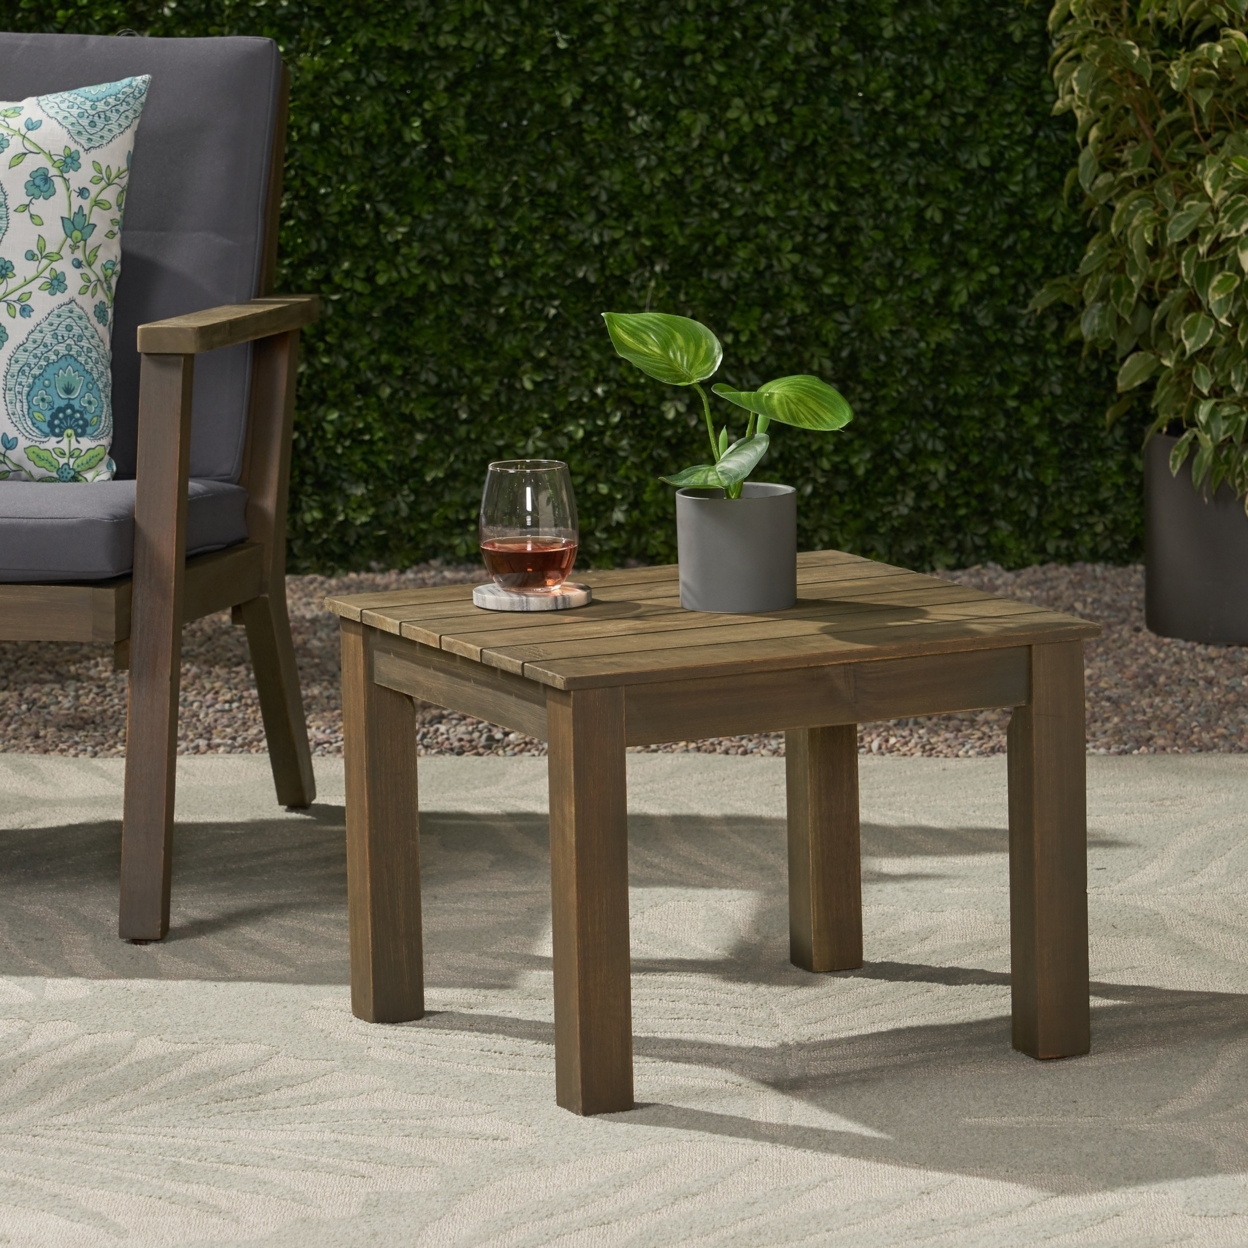 Avacyn Outdoor Mid-Century Modern End Table - Gray